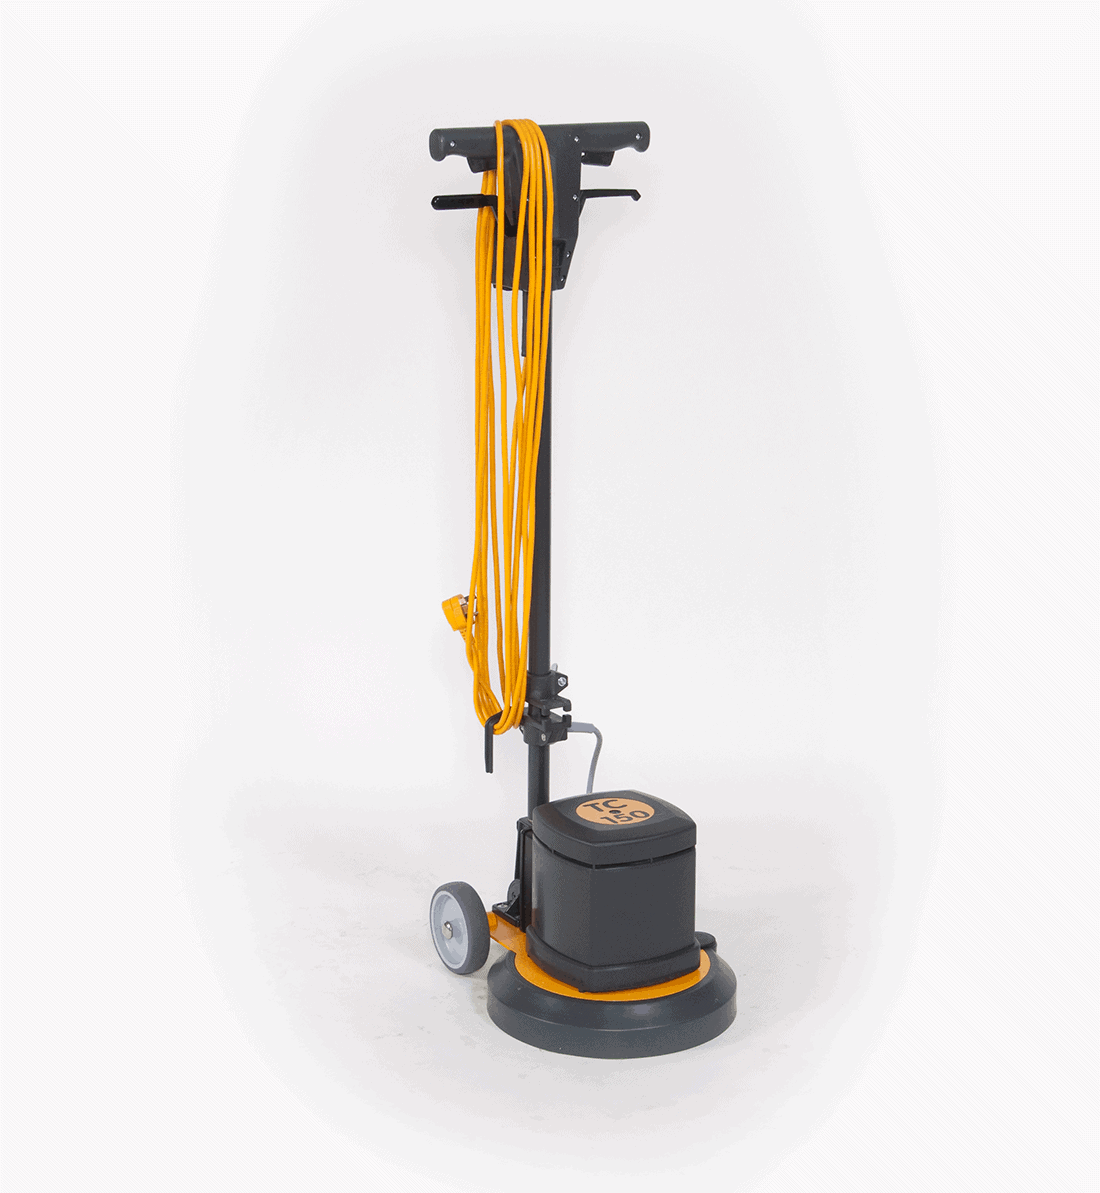 Texatherm Carpet Cleaning Machines - View Our Range